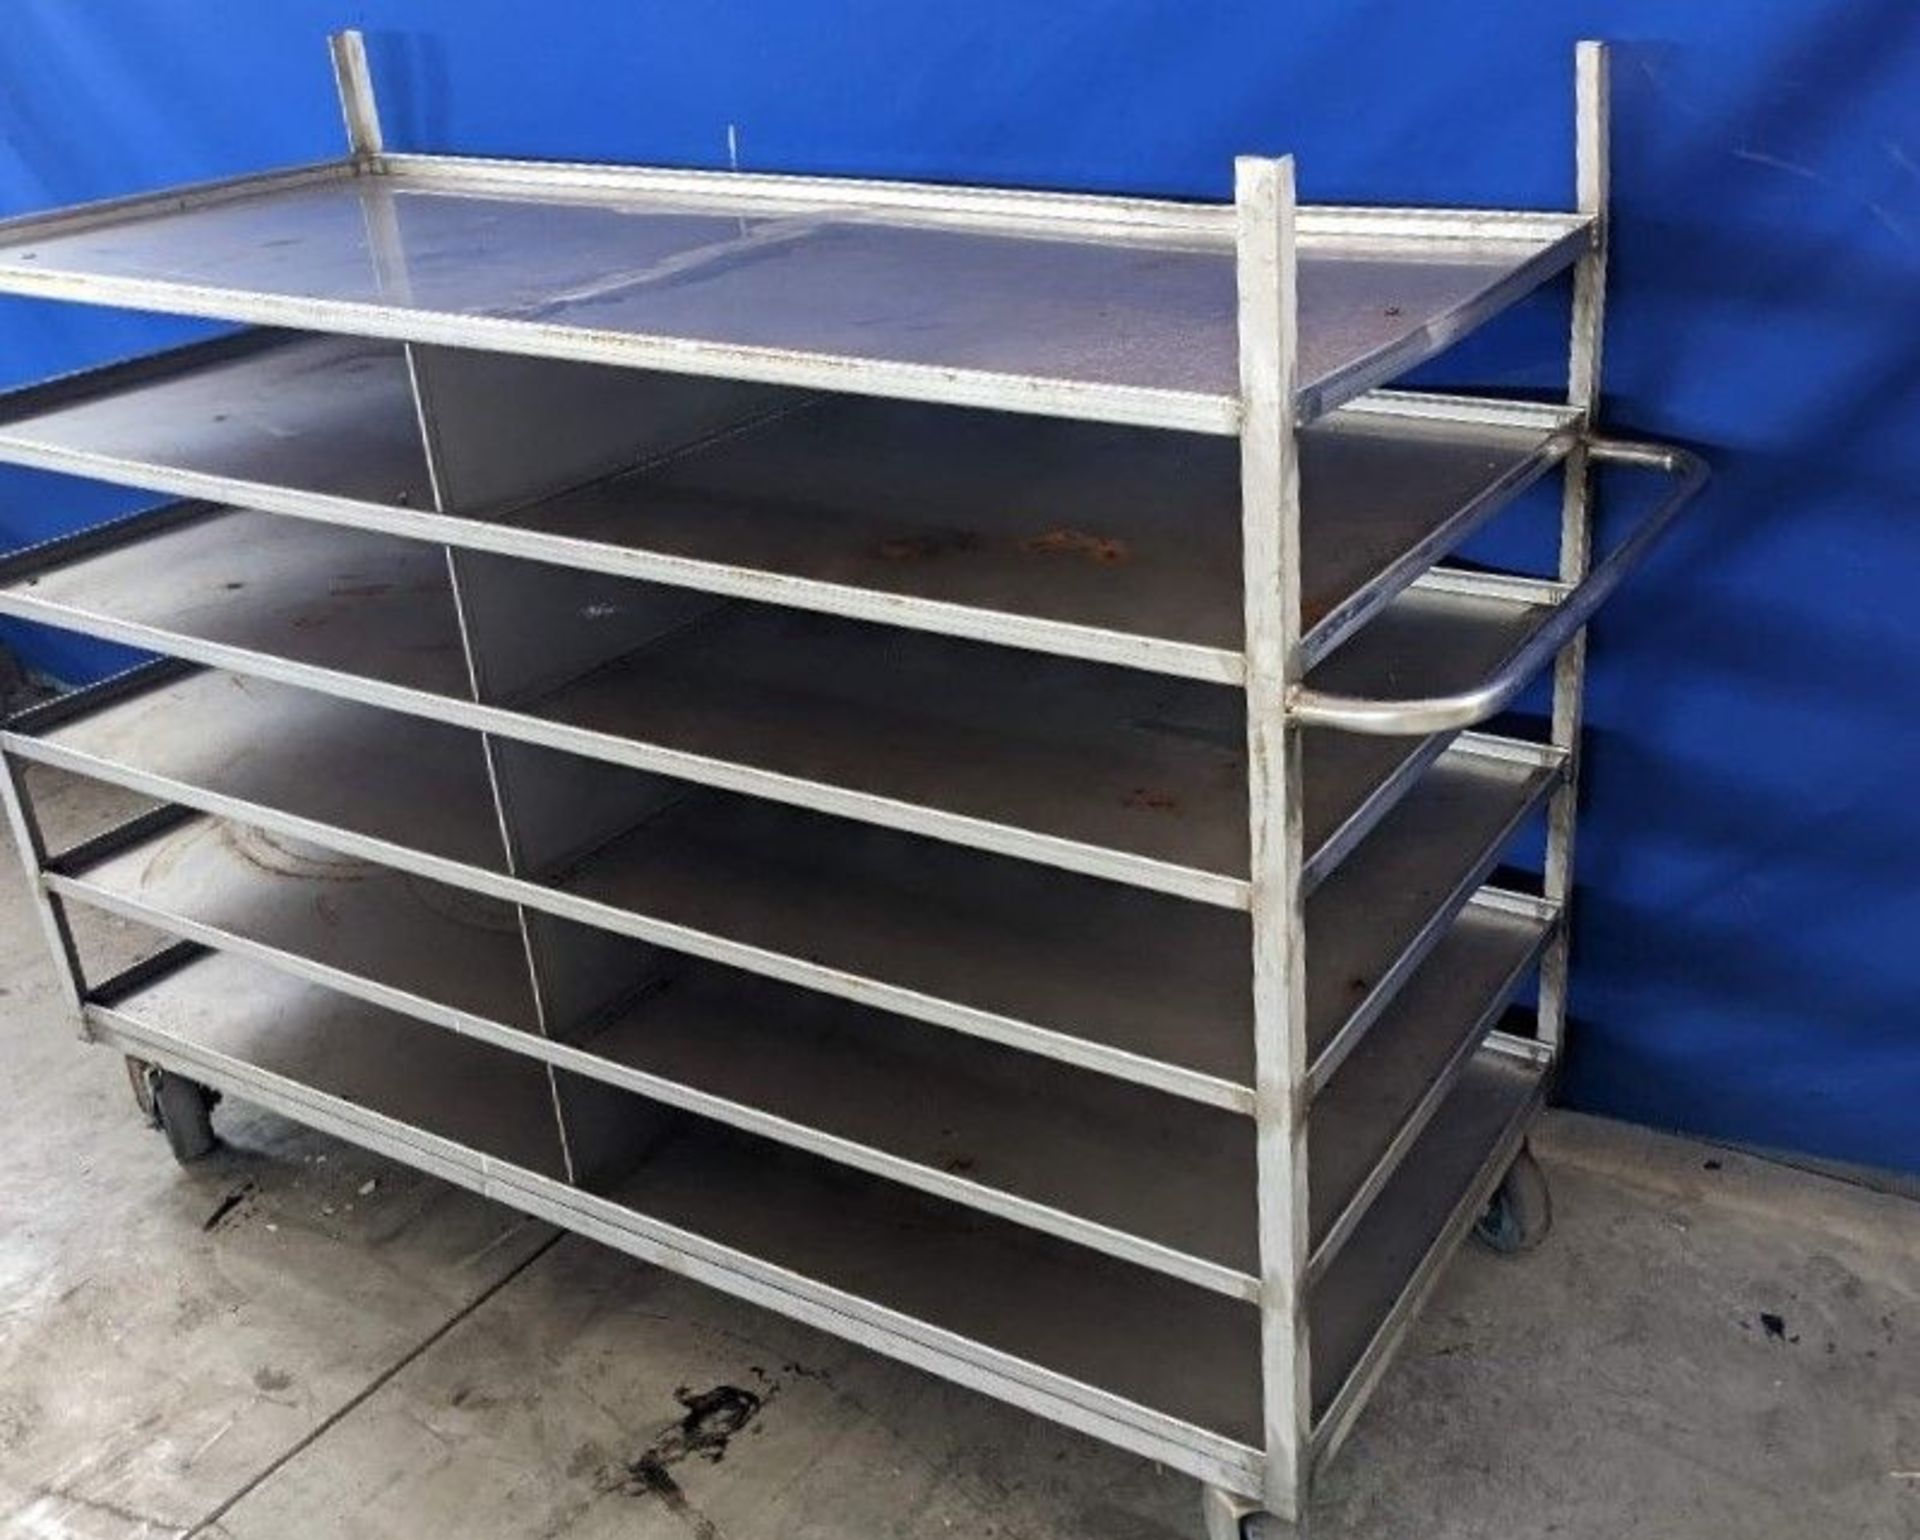 Qty (1) Material Handling Cart - Dimensions: 69"L x 28"W x 53"H (Handles Stick Out 6" on Each Side), - Image 2 of 3